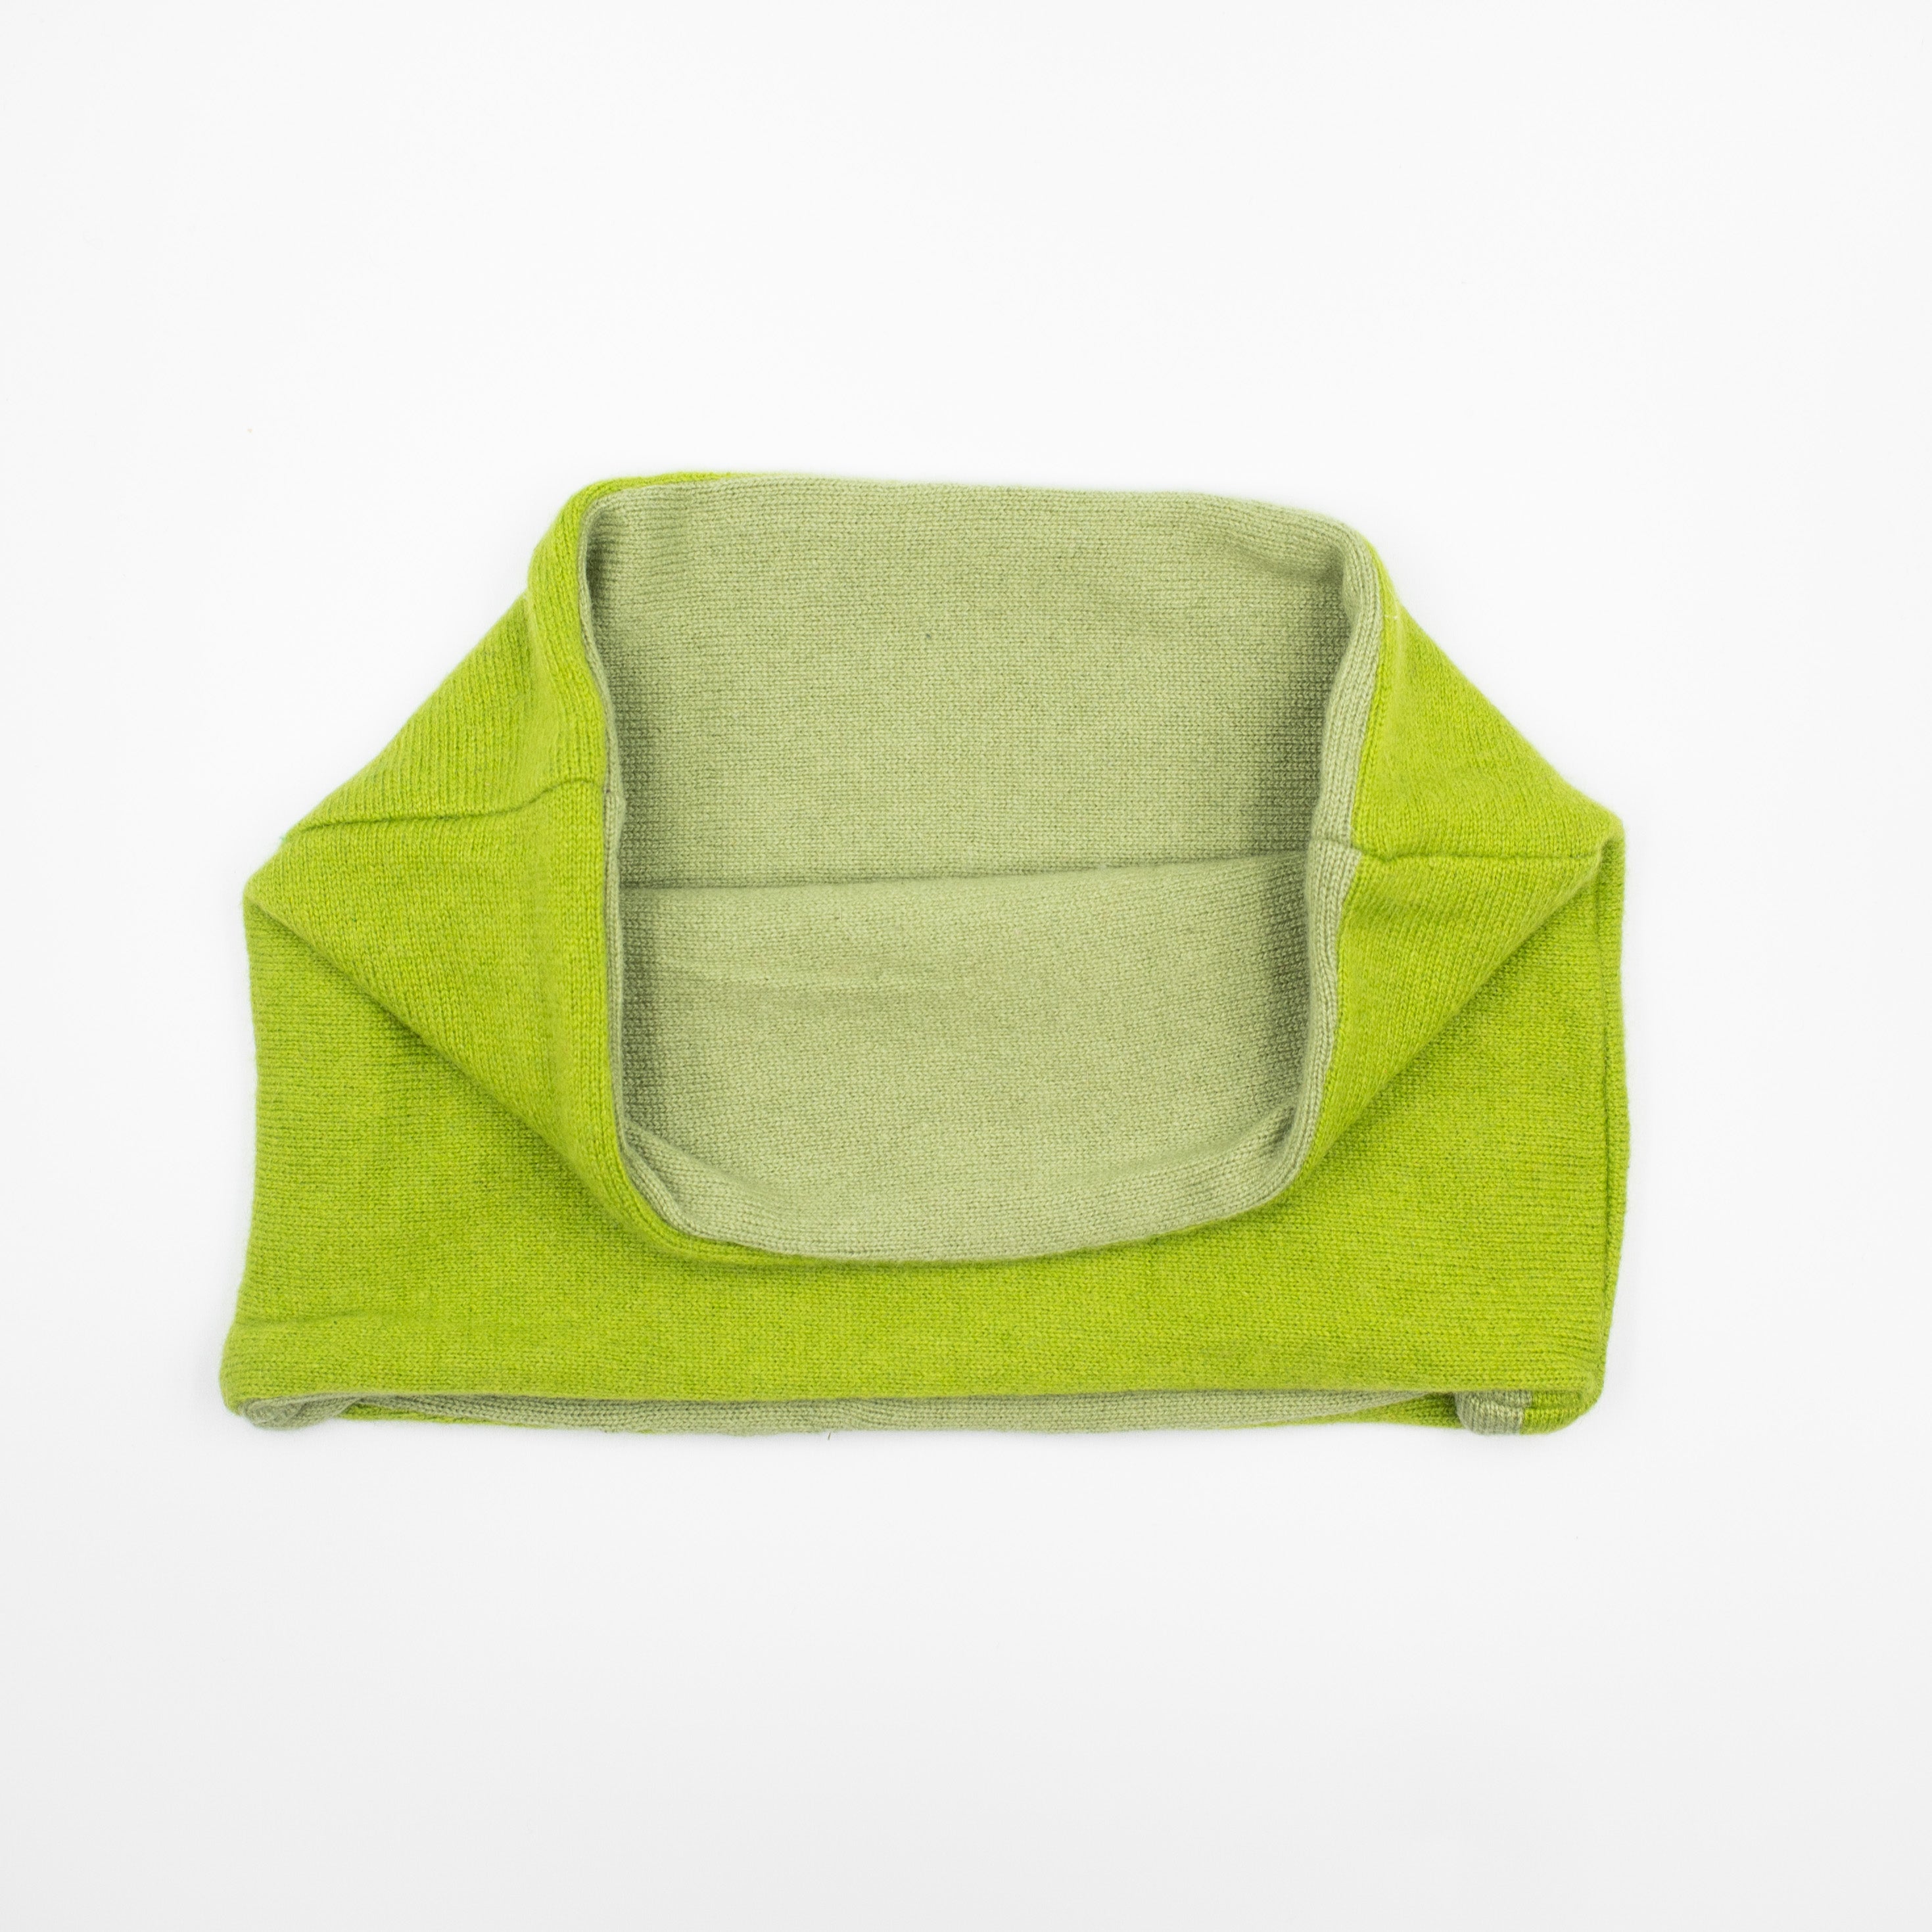 Men’s Bright Lime Green and Sage Neck Warmer